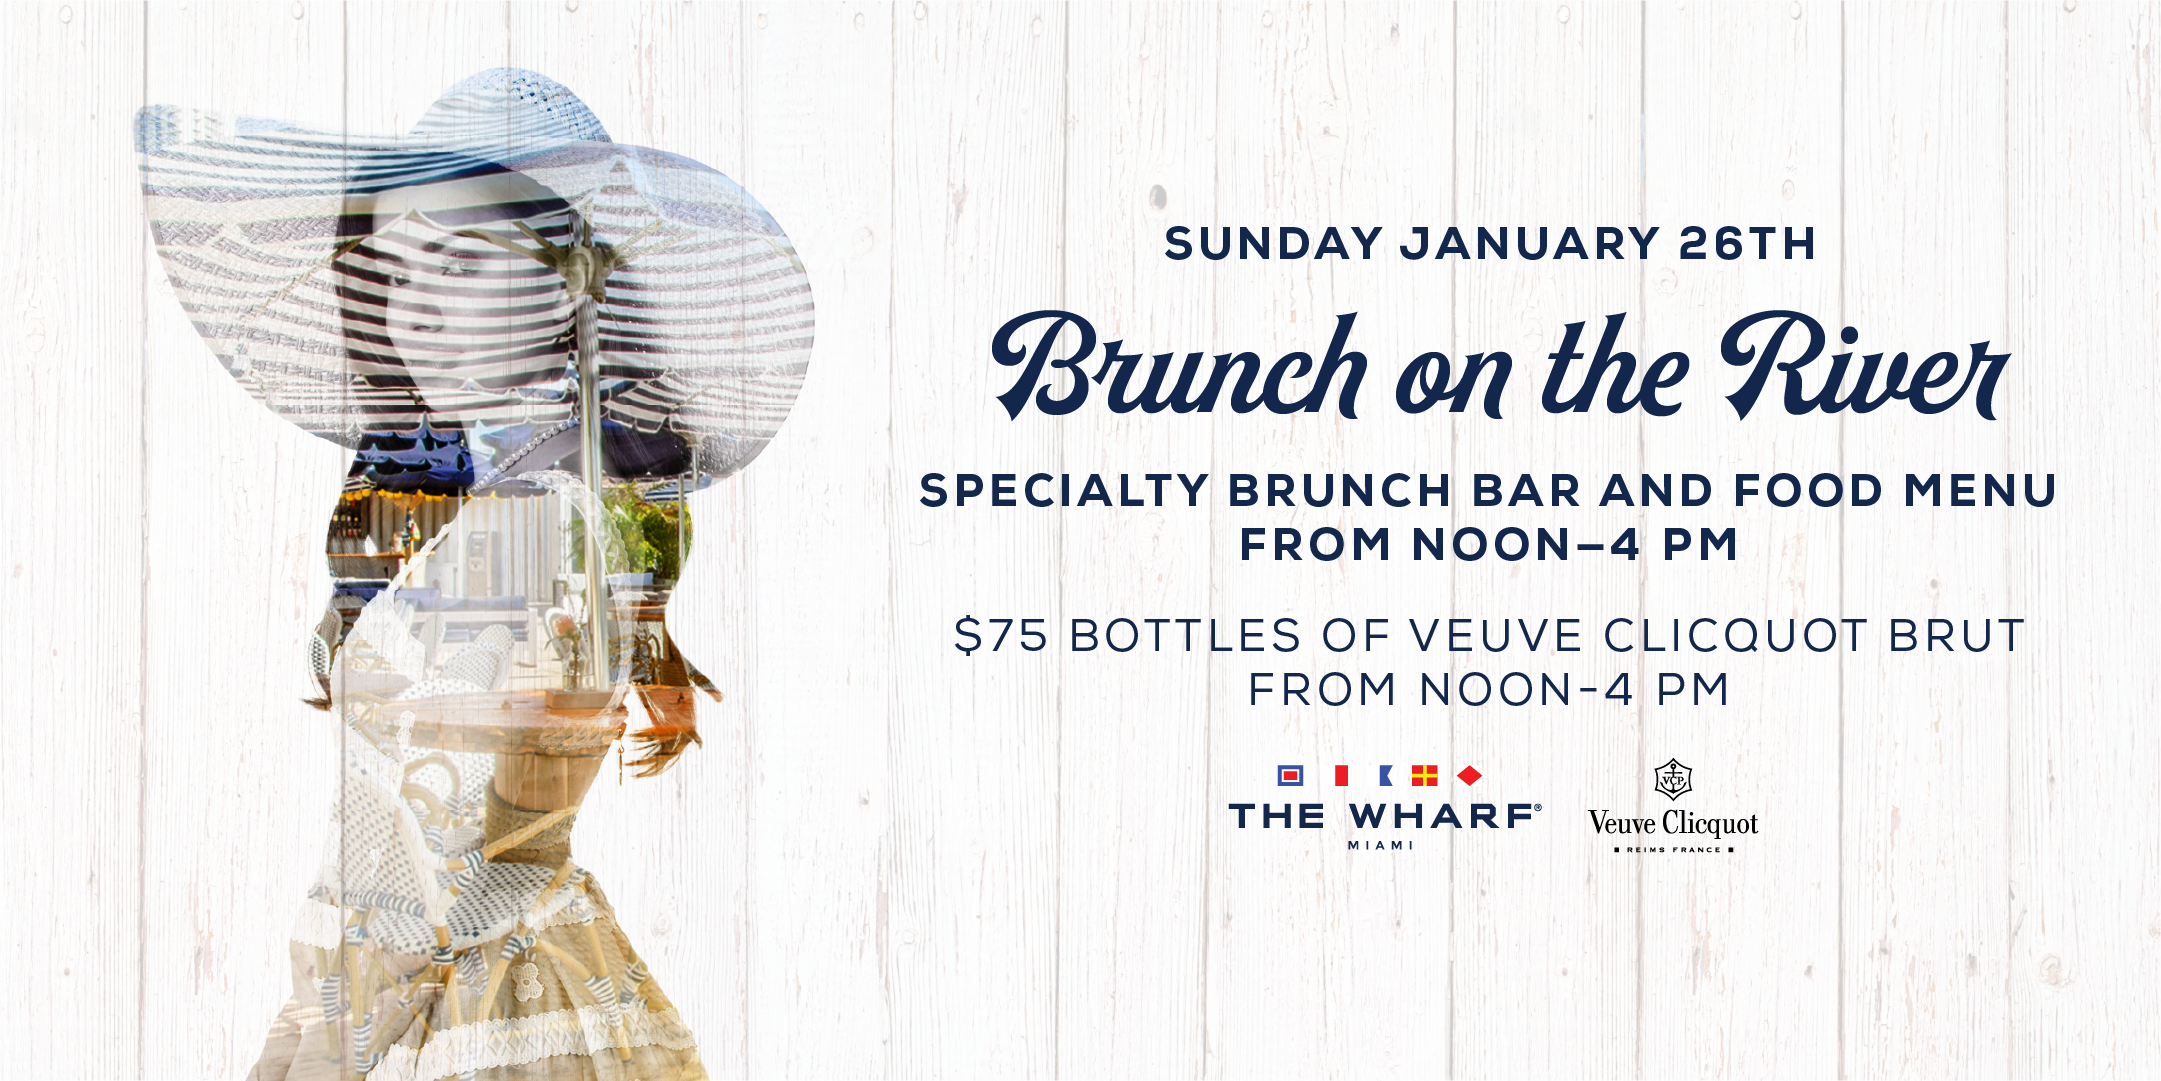 Brunch on The River at The Wharf Miami